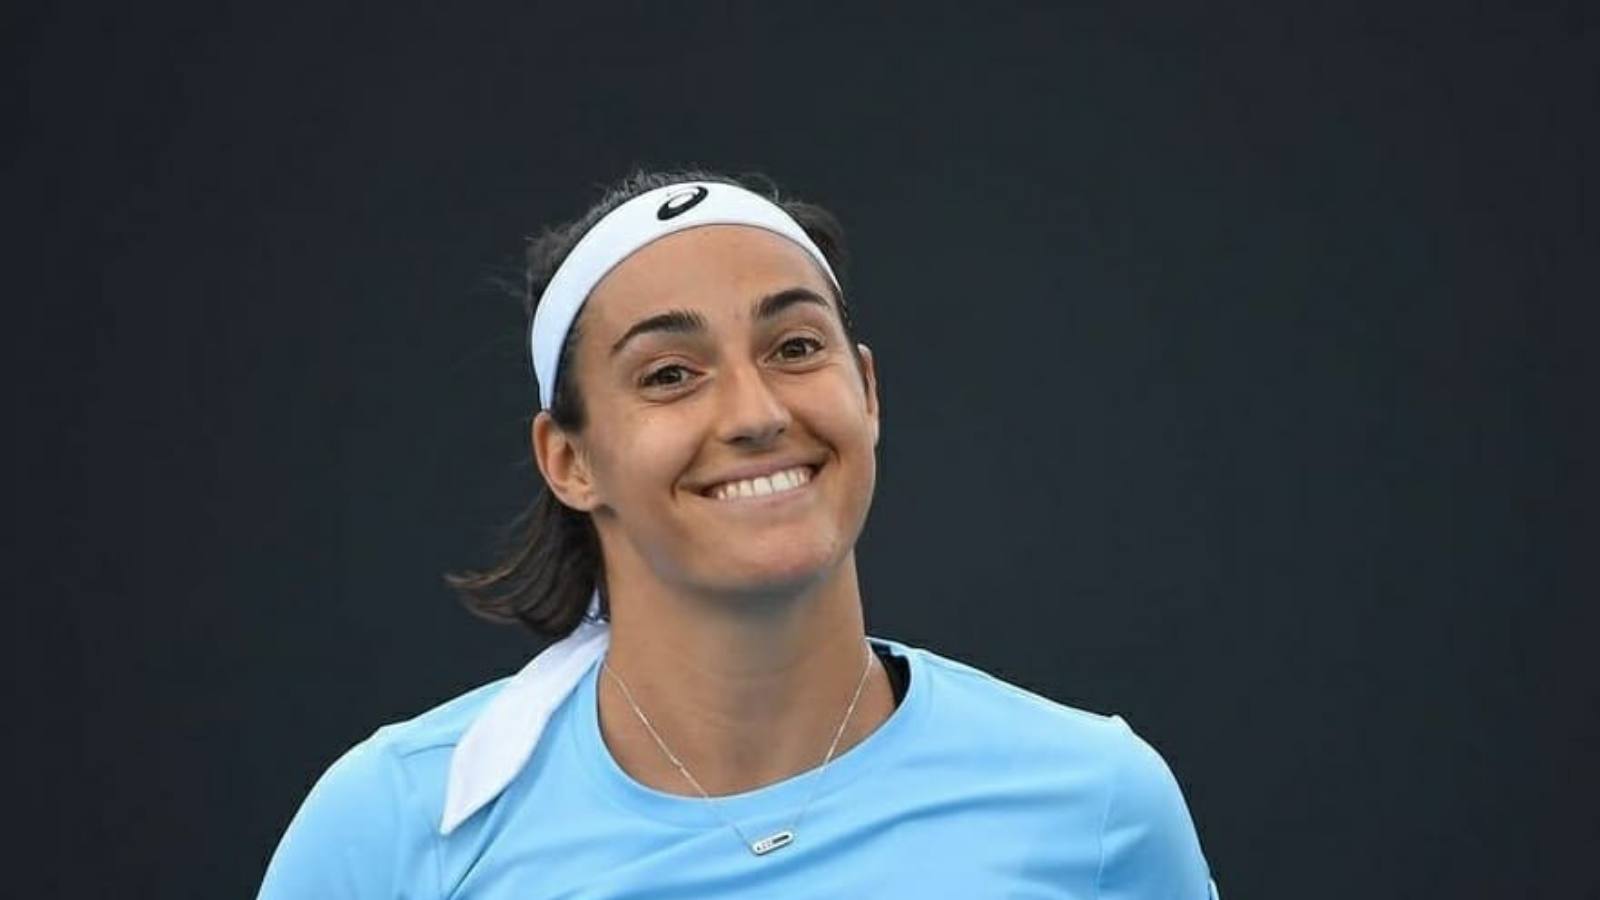 Who is Caroline Garcia's boyfriend? Know all about her relationship